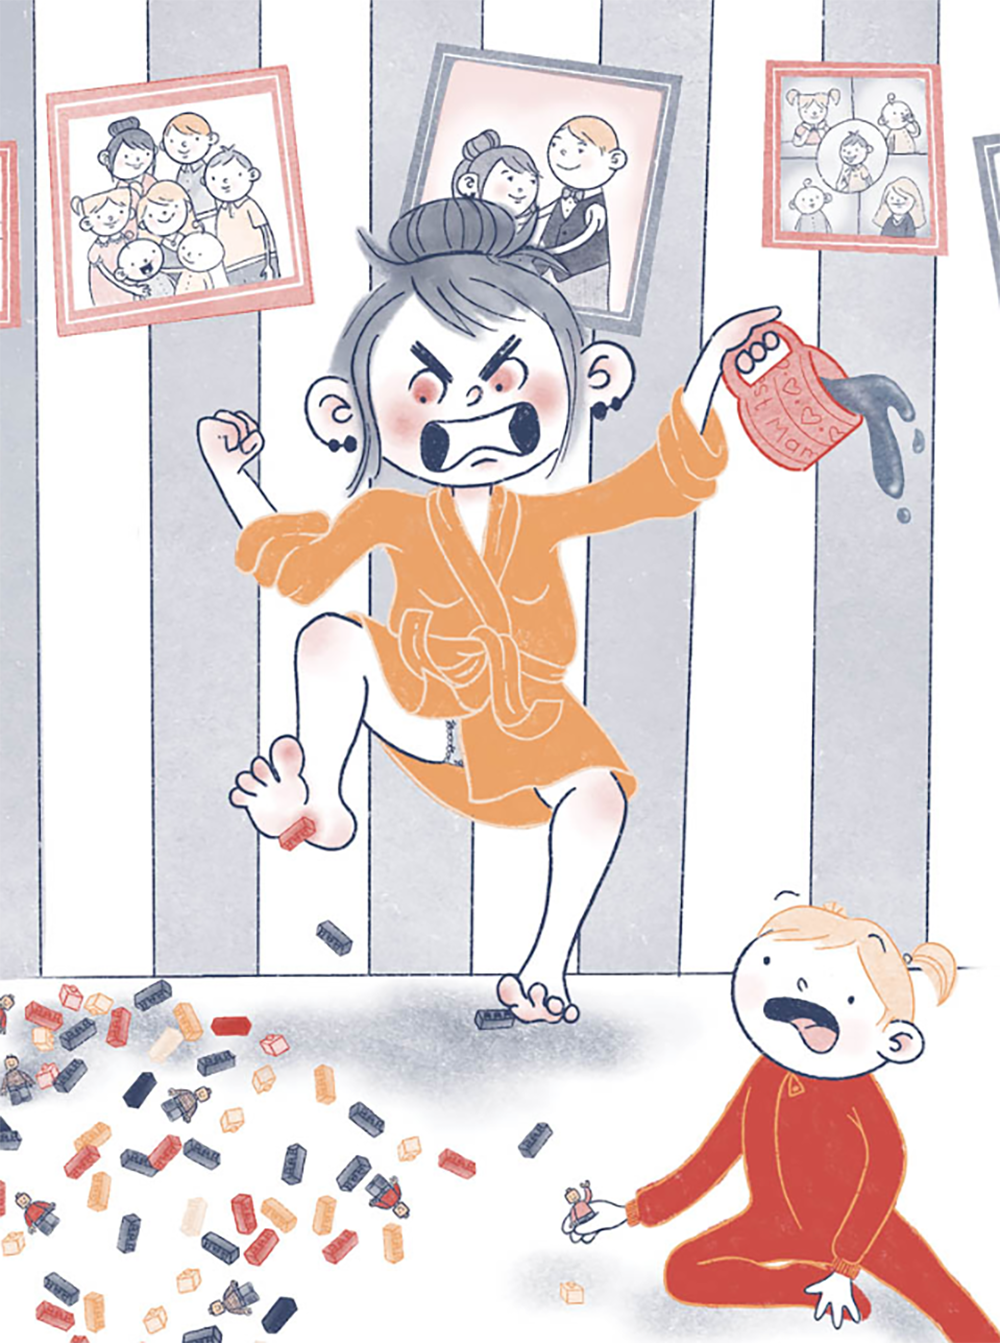 illustration of mother getting angry while stepping on legos and baby nearby